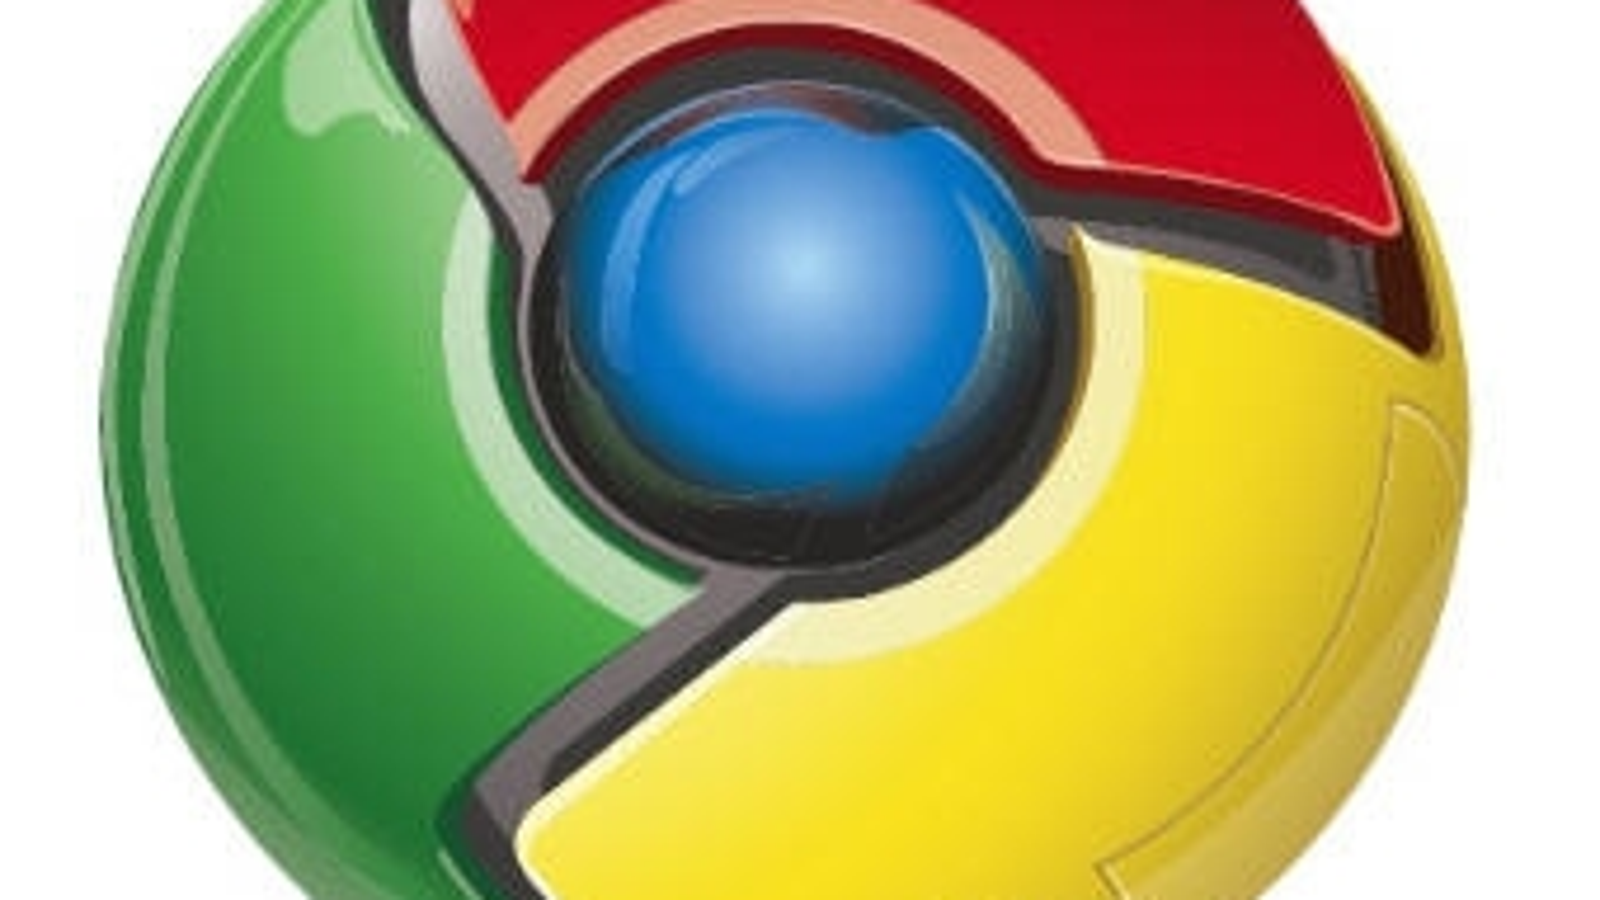 download chrome in linux